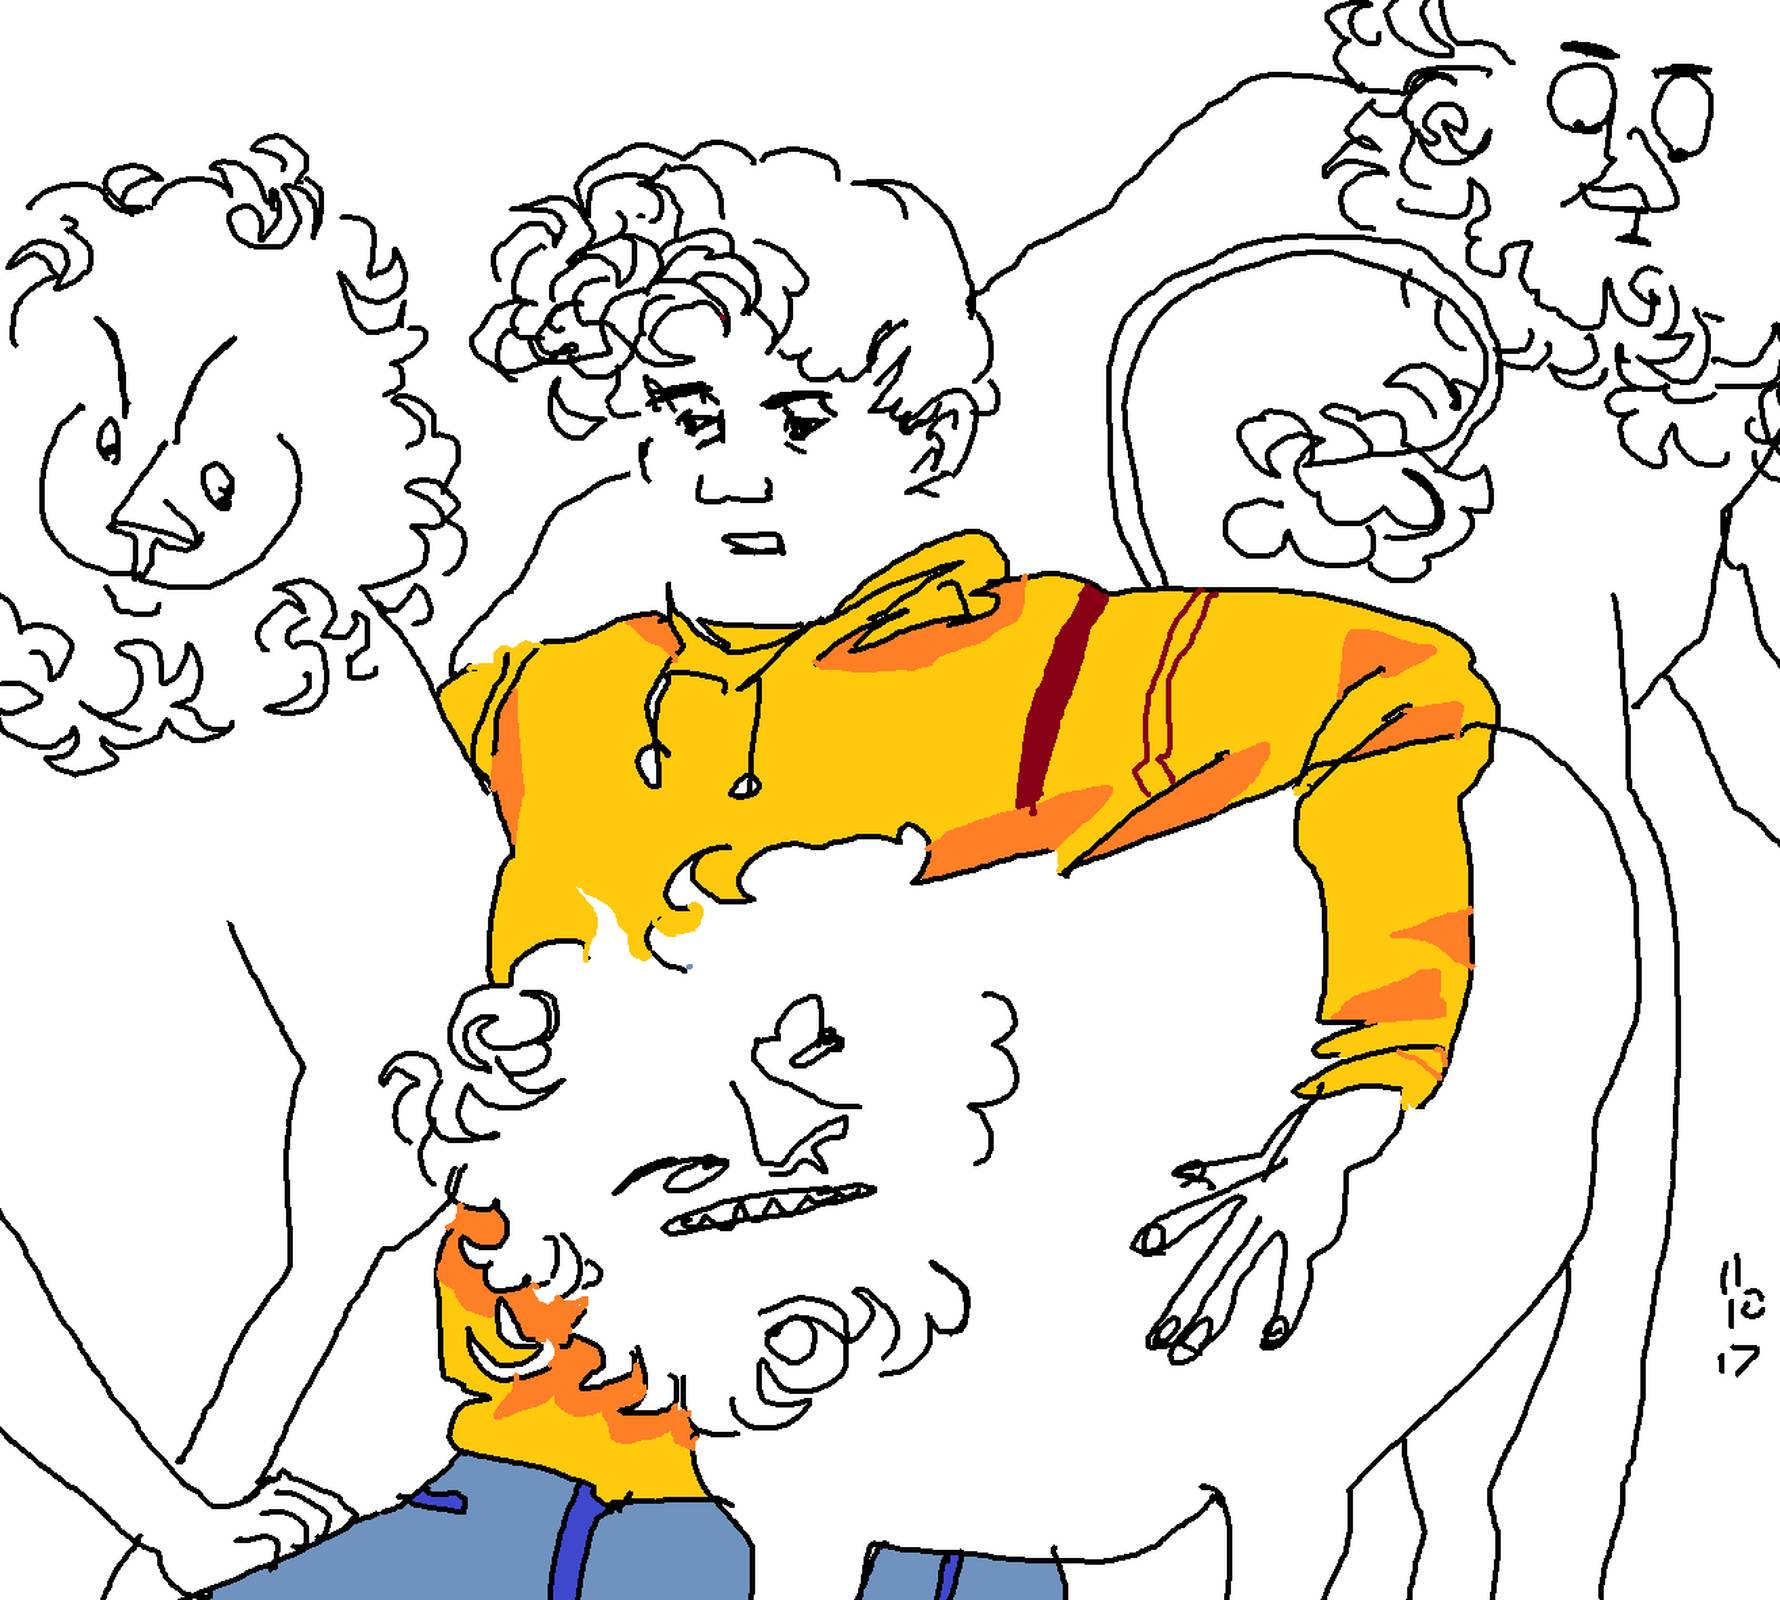 MSpaint drawing of a person in an orange hoodie surrounded by three strange but friendly lions (uncolored)